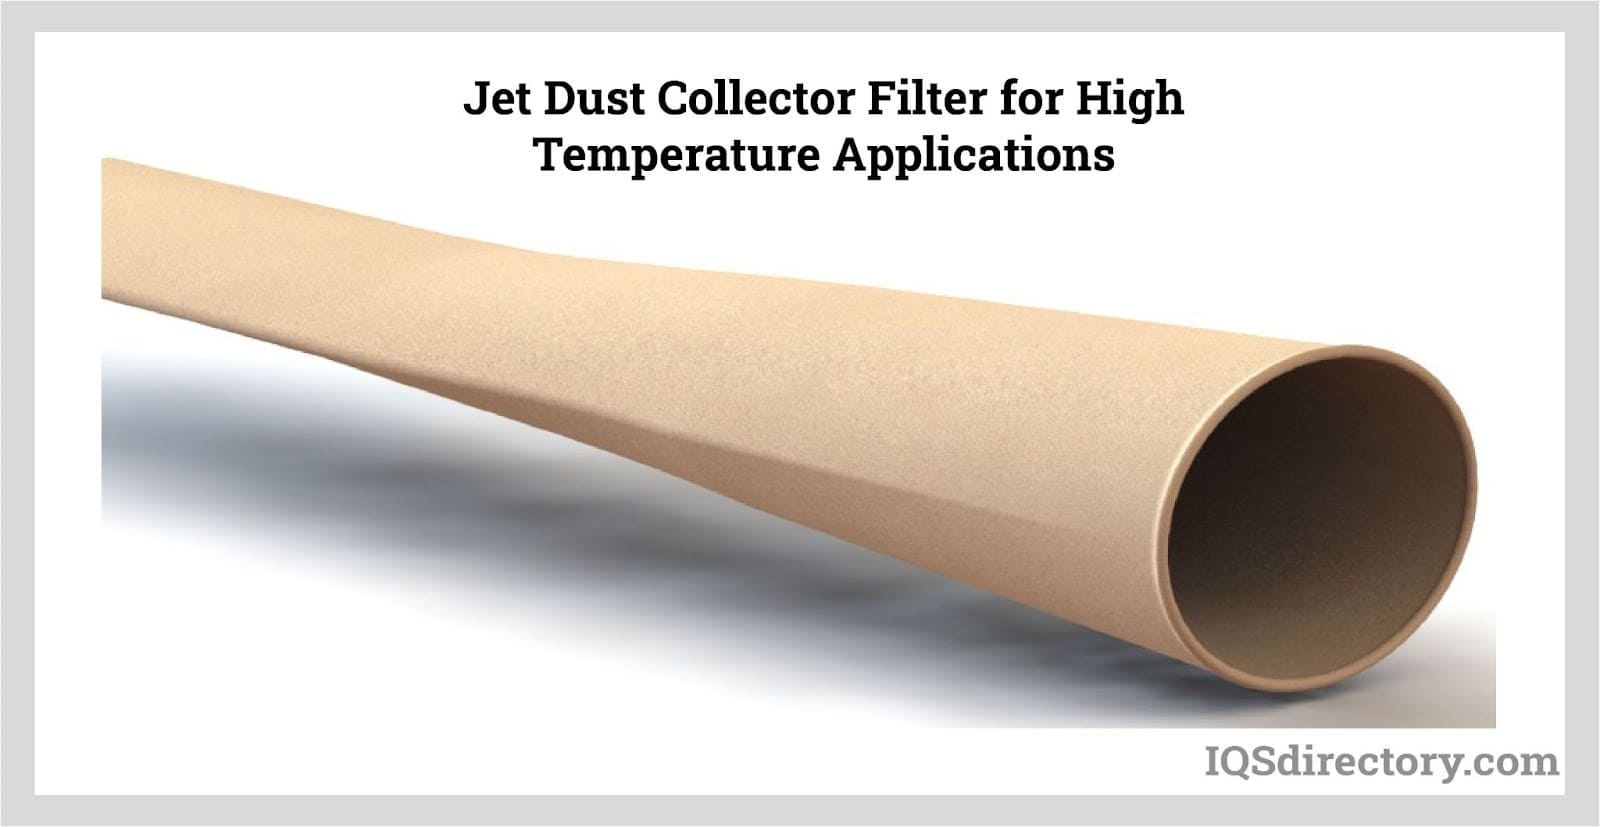 Jet Dust Collector Filter for High Temperature Applications